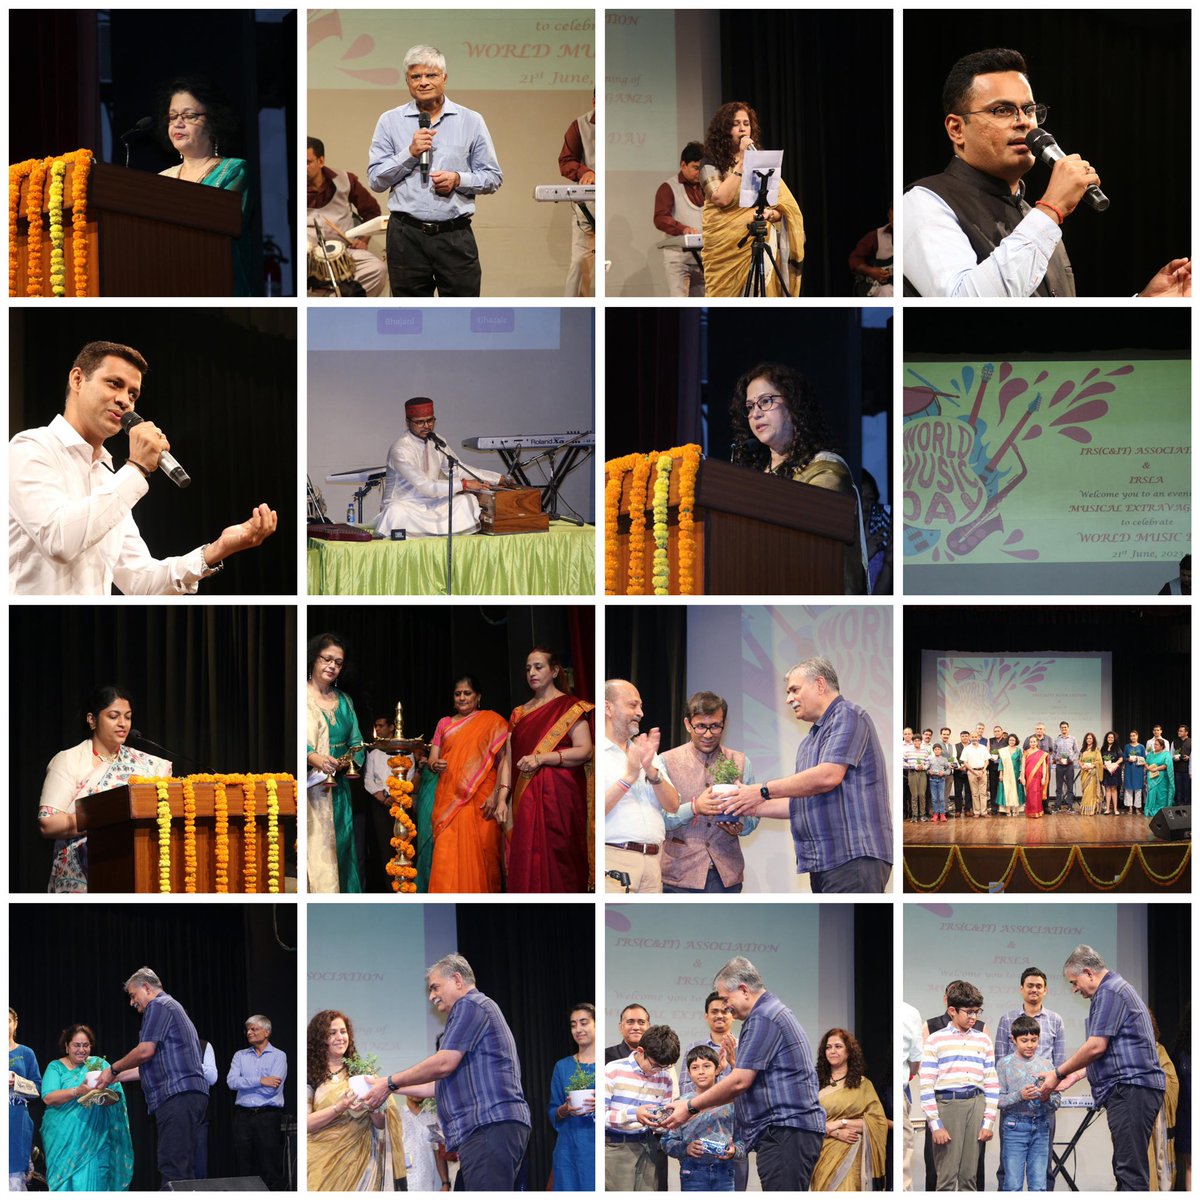 A musical treat on #WorldMusicDay!

IRS (C&IT) Association & @IRSLA_CBIC organised a musical fiesta for officers and family members as a step forward to uphold the rich cultural heritage & legacy of music. The melodious performances by singers left the audience mesmerised.